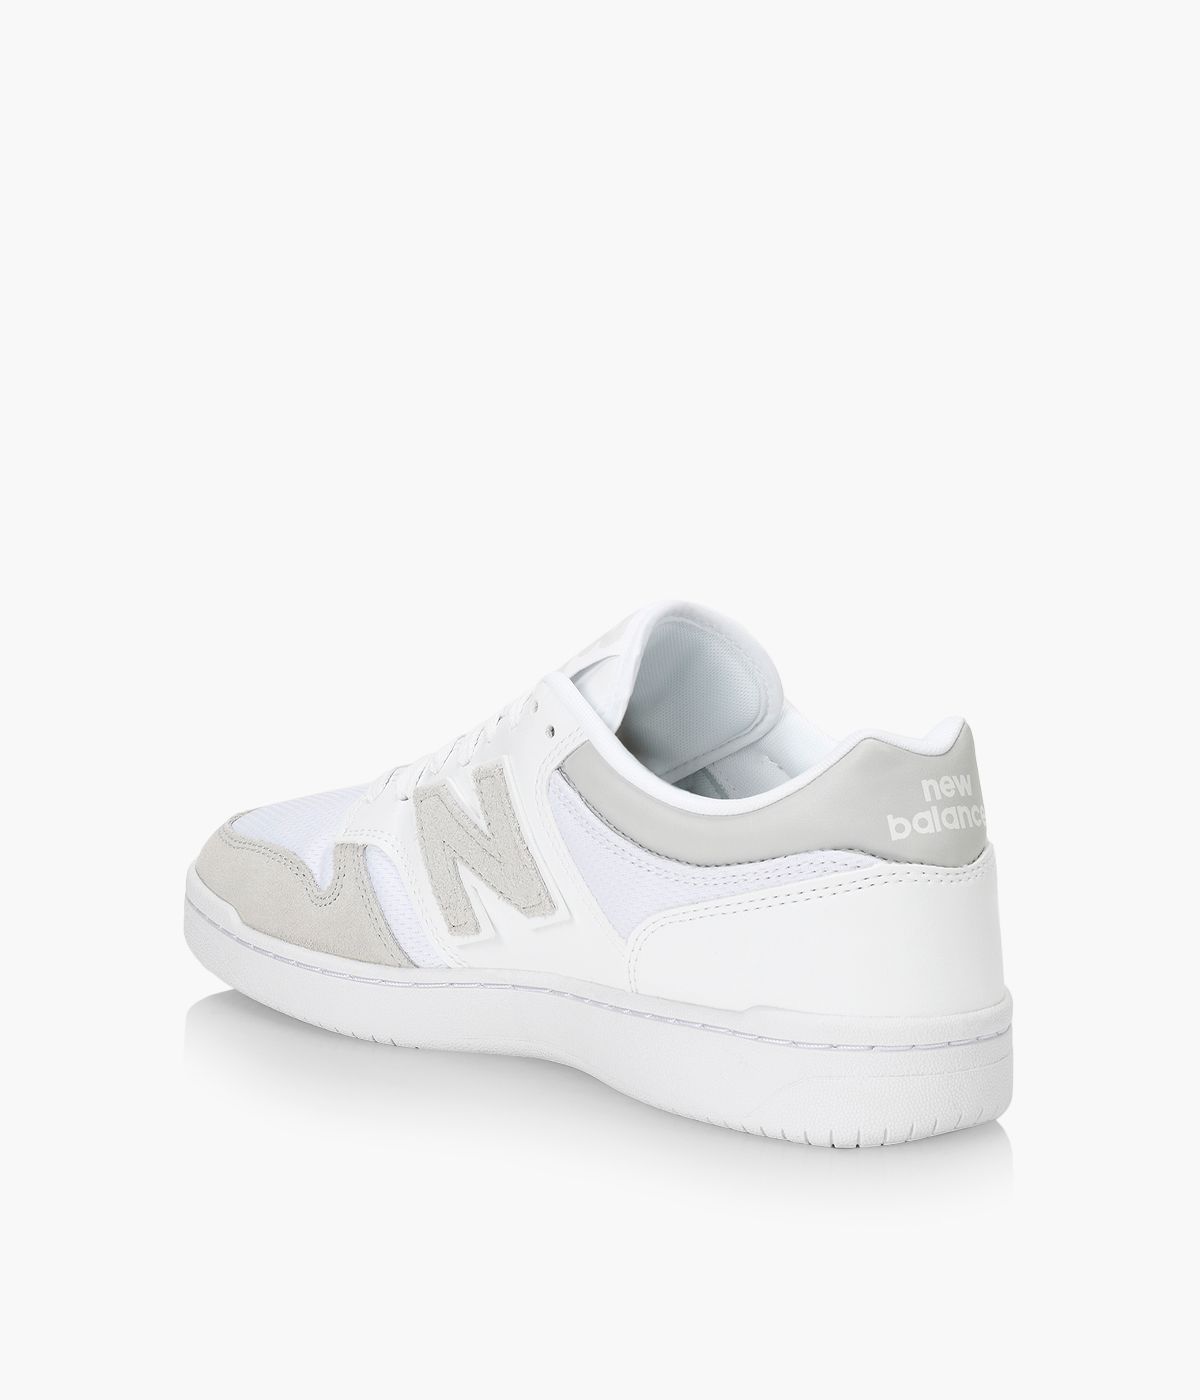 NEW BALANCE 480 - White Leather | Browns Shoes